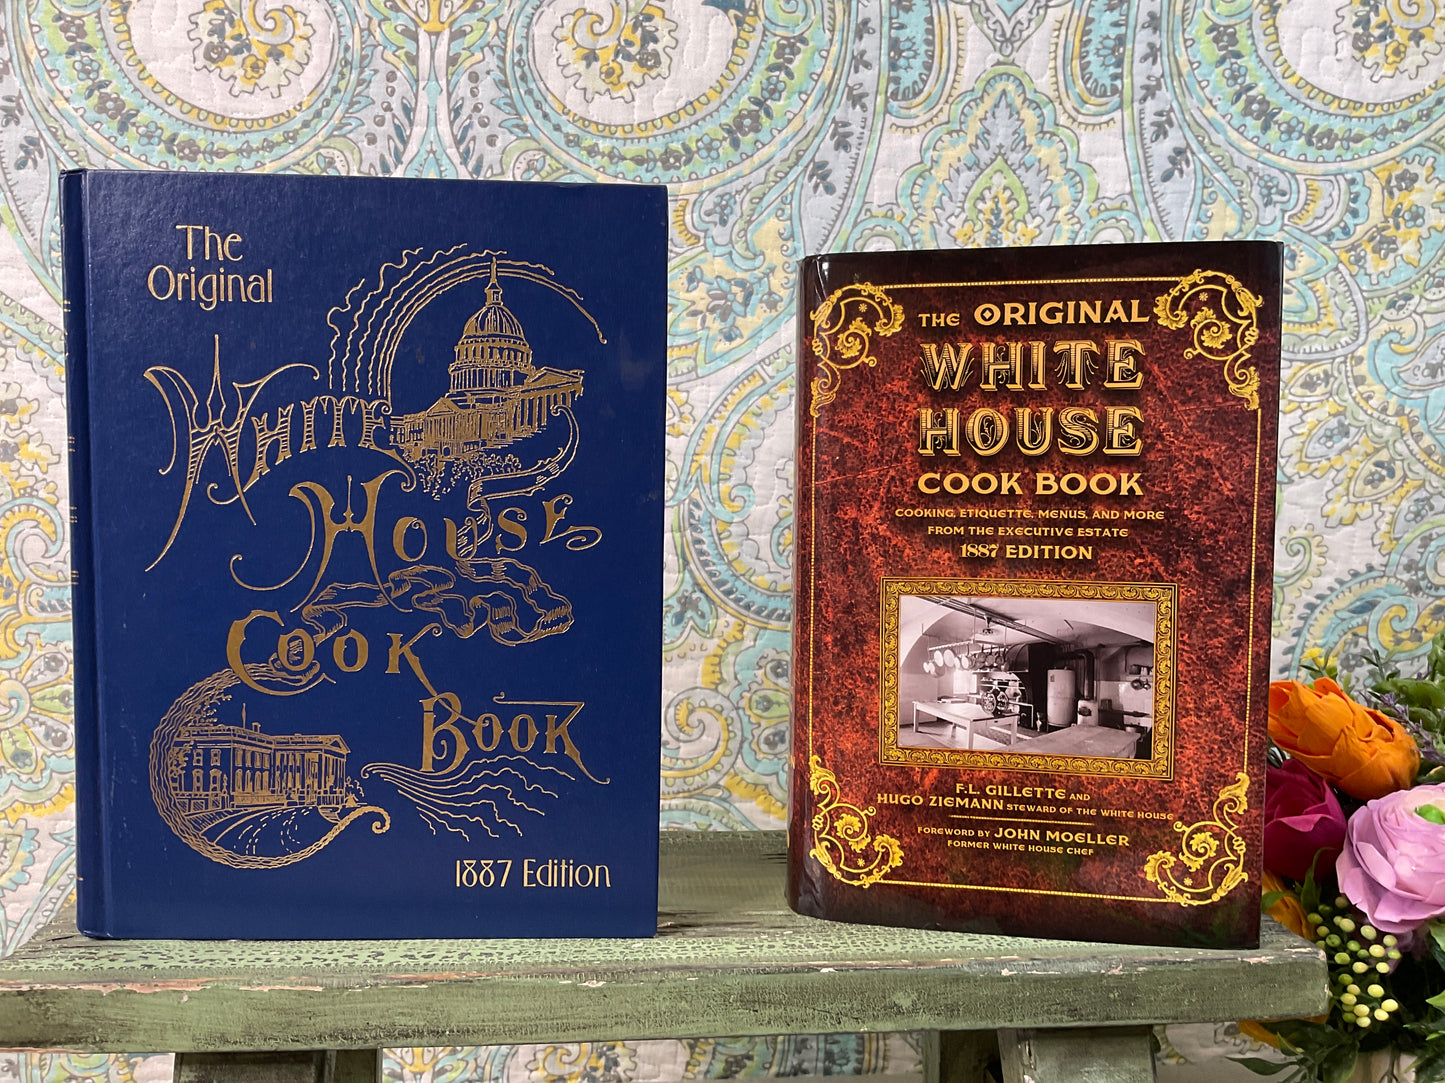 The Original White House Cookbook 1999 & 2017 Editions, Sold Separately